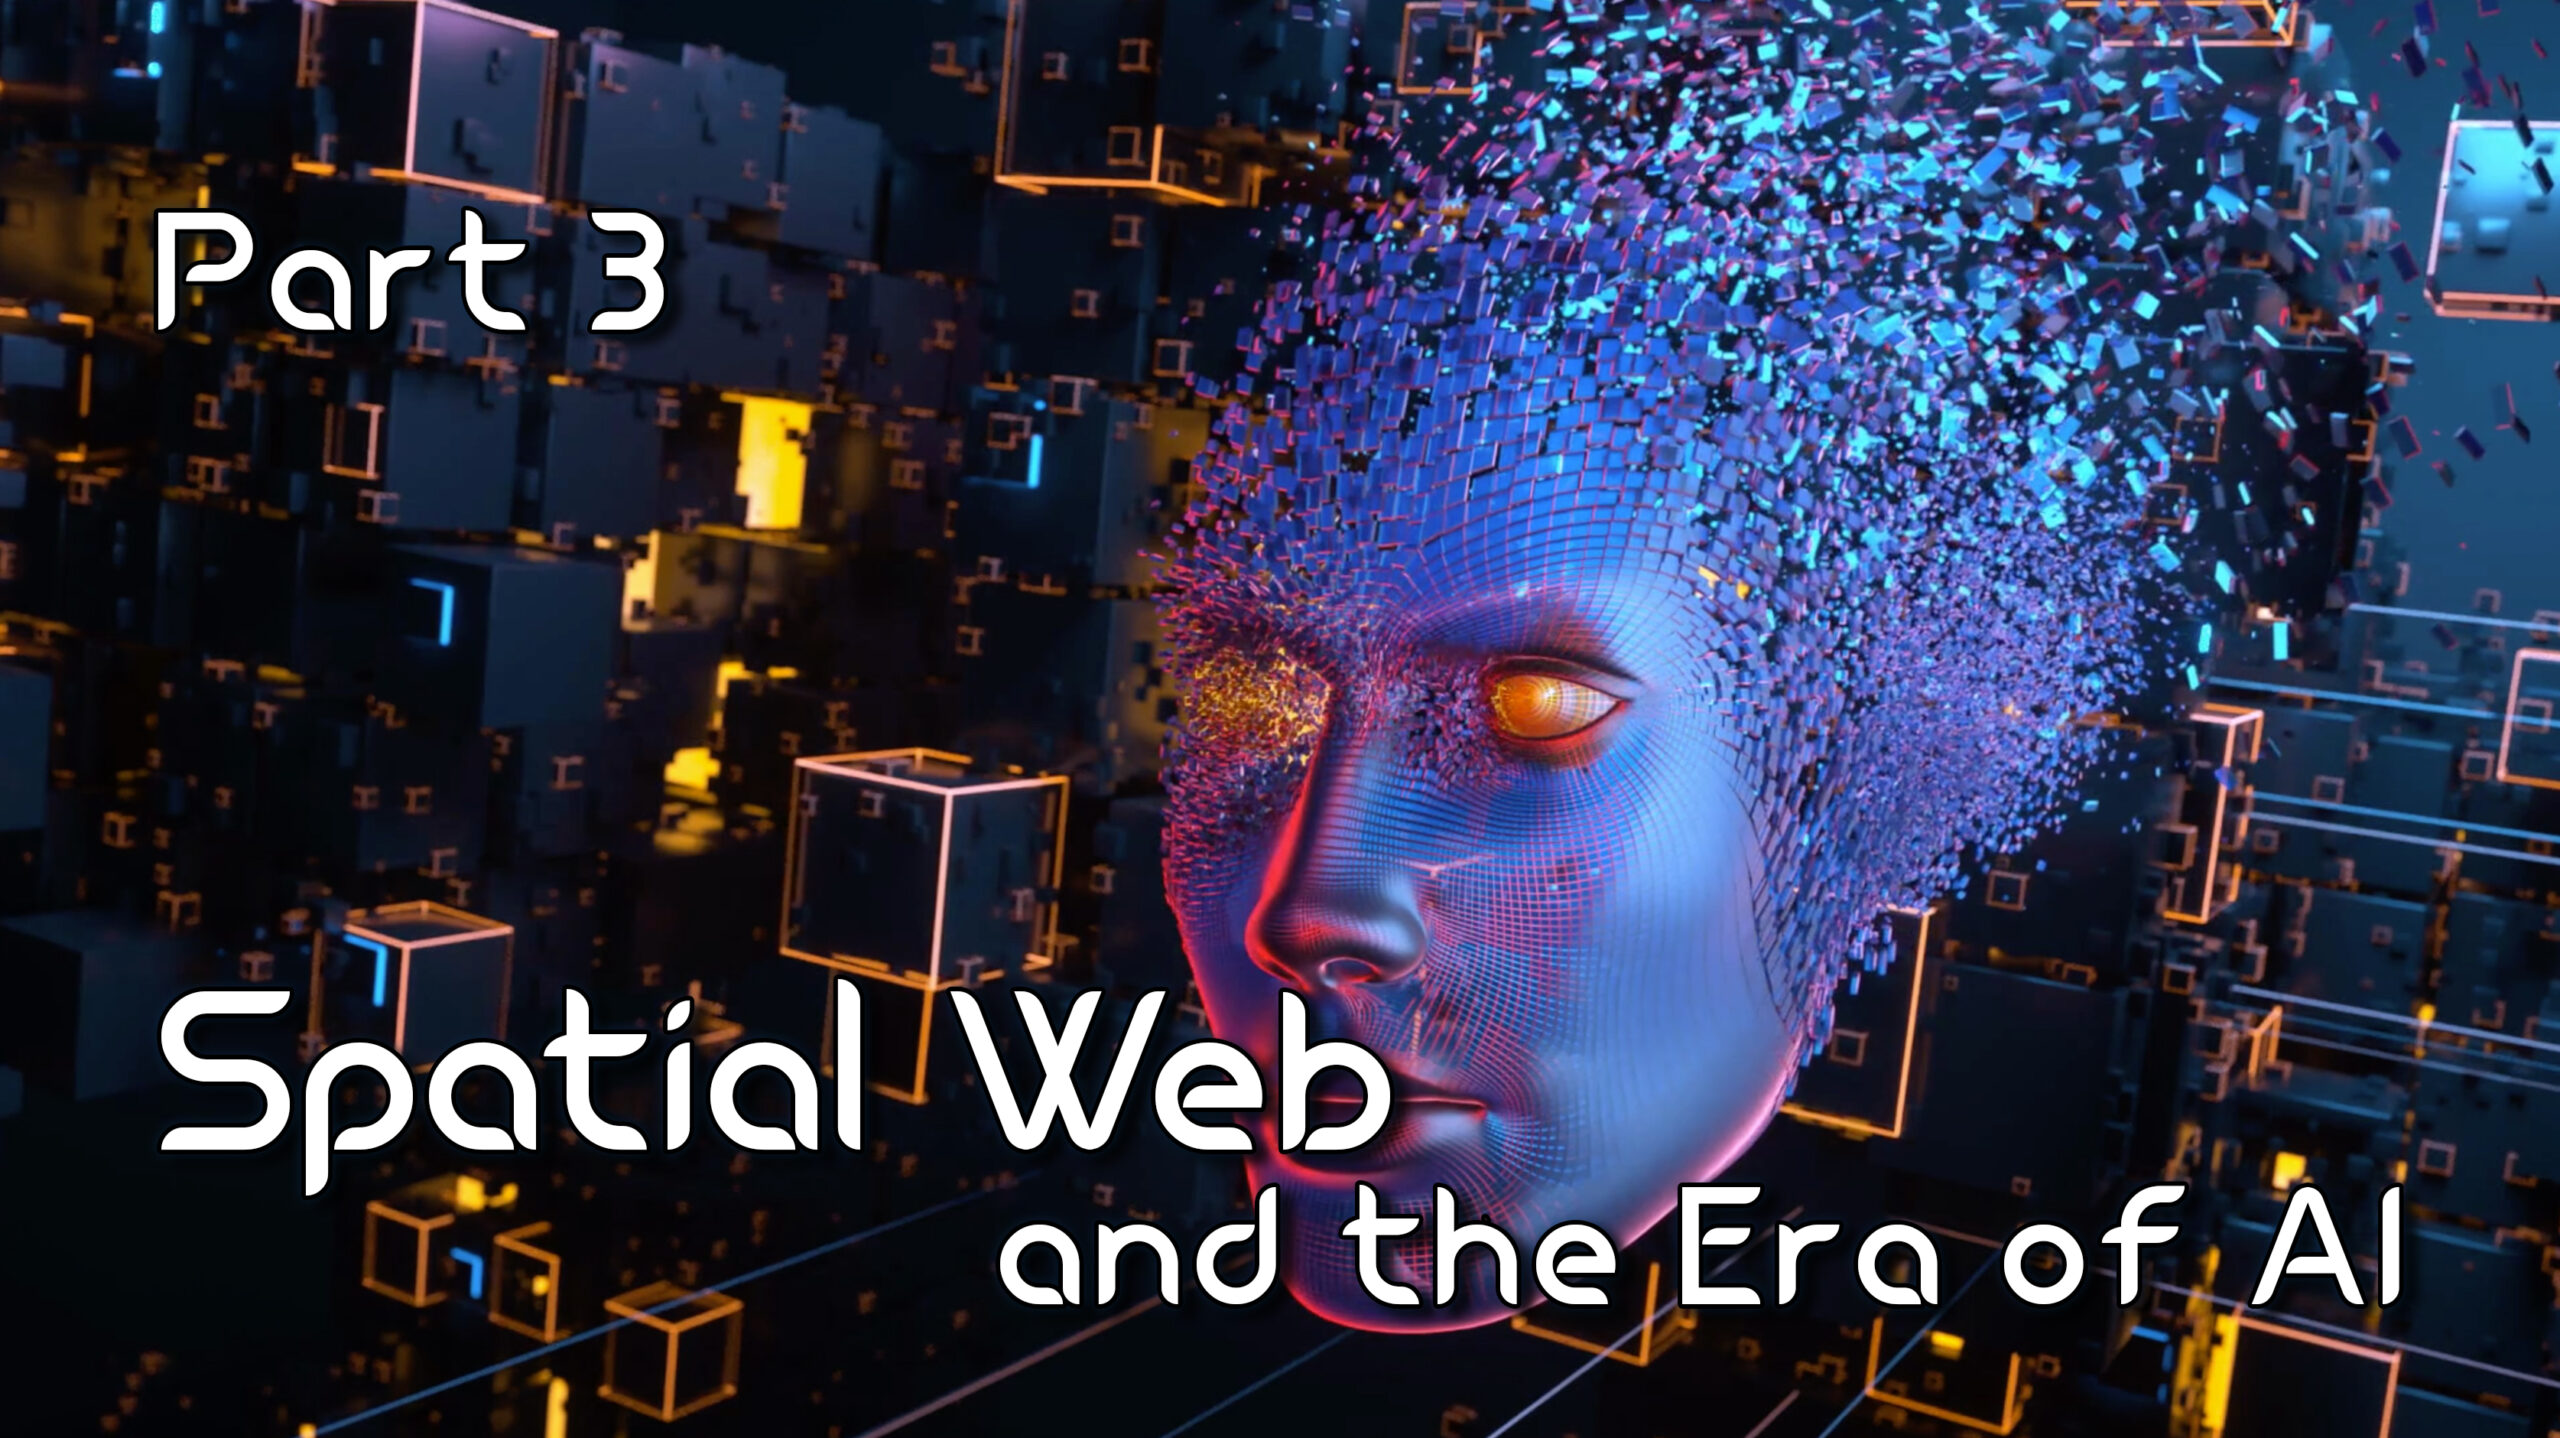 VERSES AI KOSM™ OS Slashes Developer Barrier to Entry for Building AI Apps – Spatial Web and the Era of AI  – Part 3